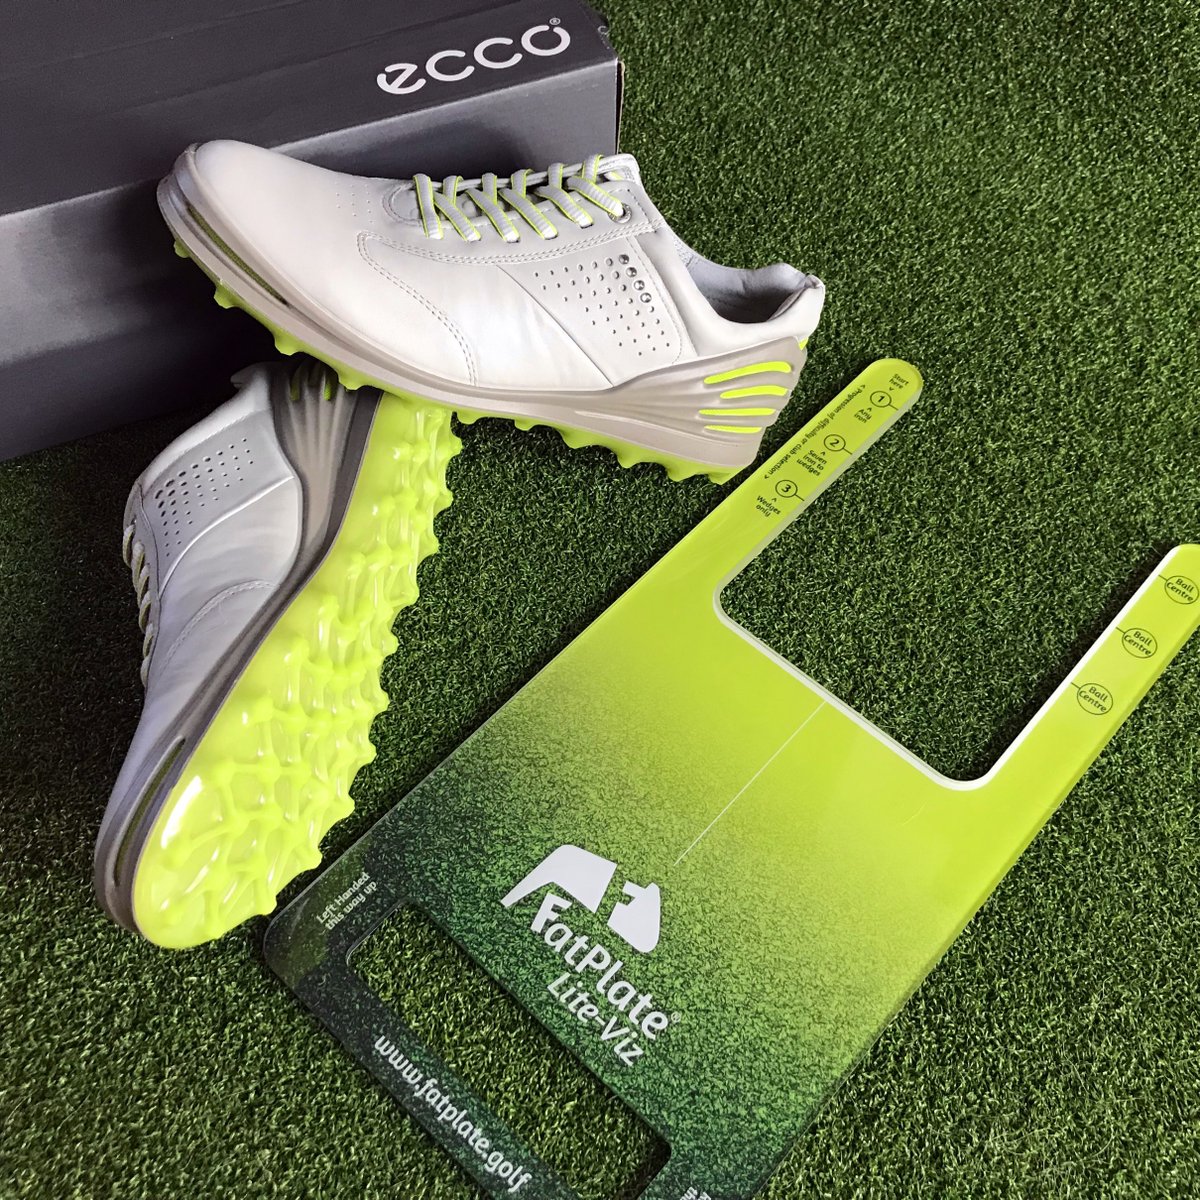 “RT, Like, Tag (telling us your shoe size) for a chance to WIN a pair of fabulous @ECCO_GOLF Cage Pro shoes (concrete) AND a @fatplategolf Lite-Viz (Citrus Lime)
#HYDROMAX #SPYDR-GRIP #concrete #perfectpartners #viz #lime